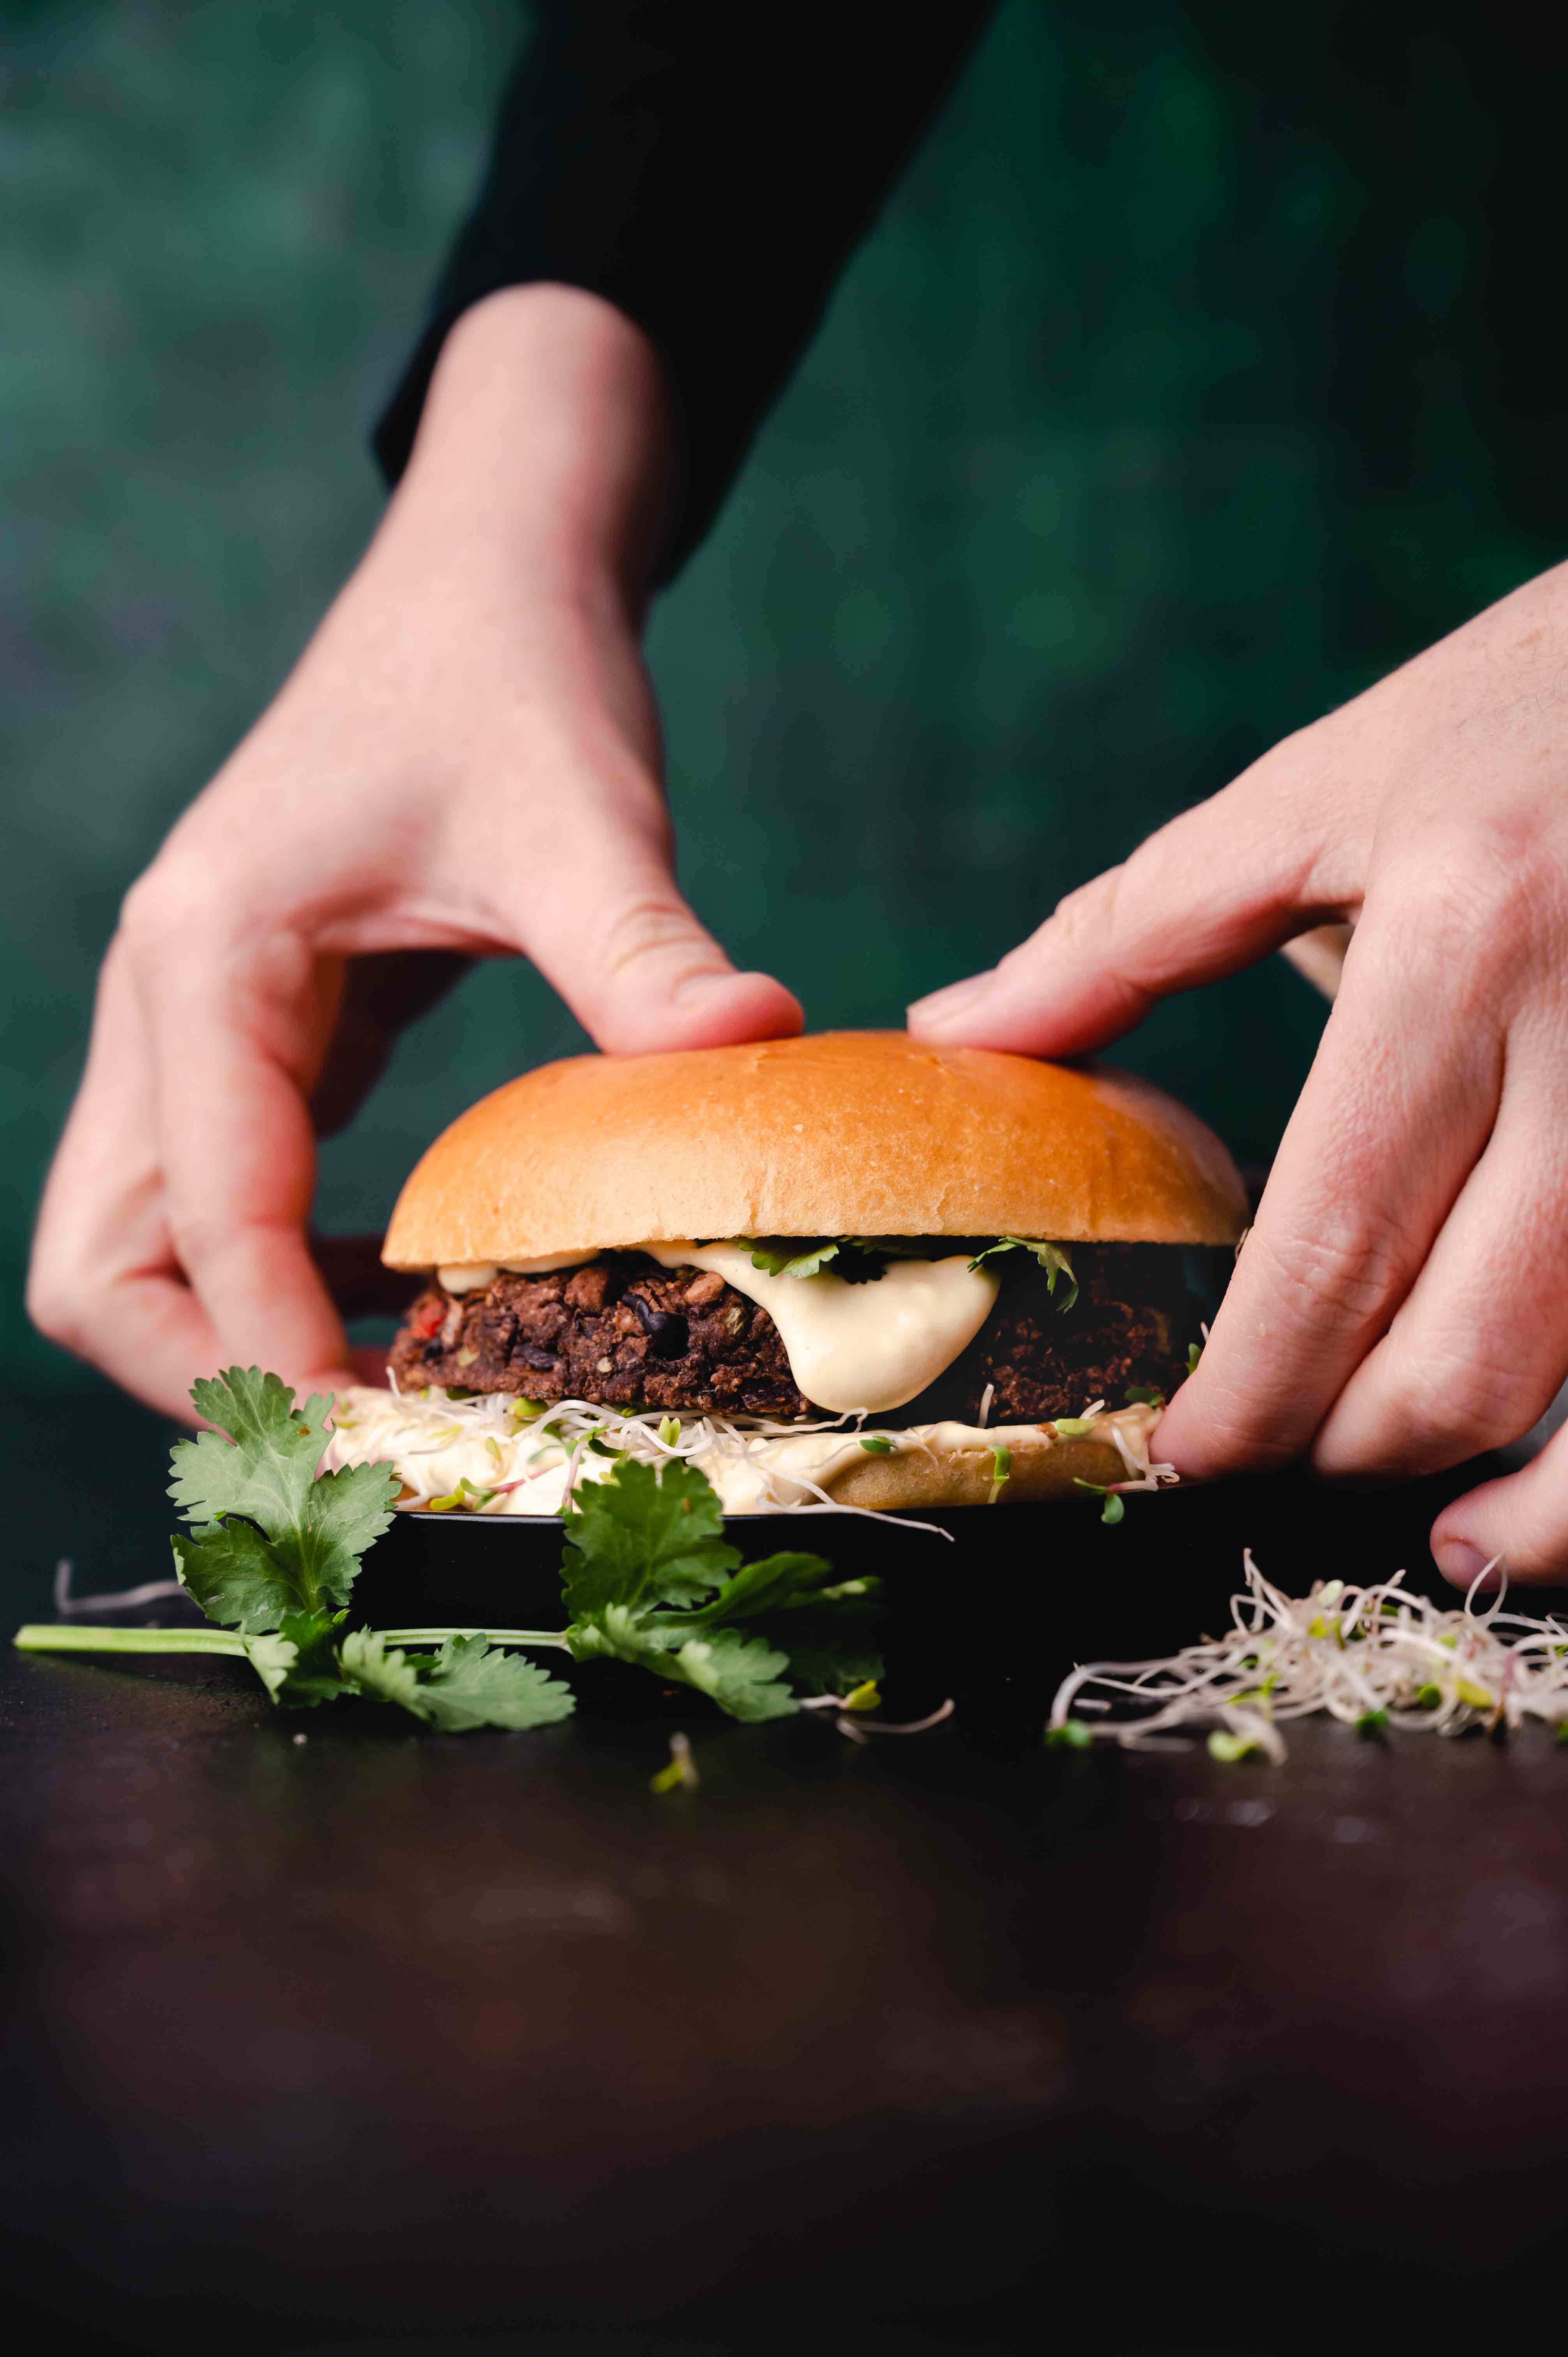 Hands presenting a gourmet burger with toppings and herbs on a dark background.